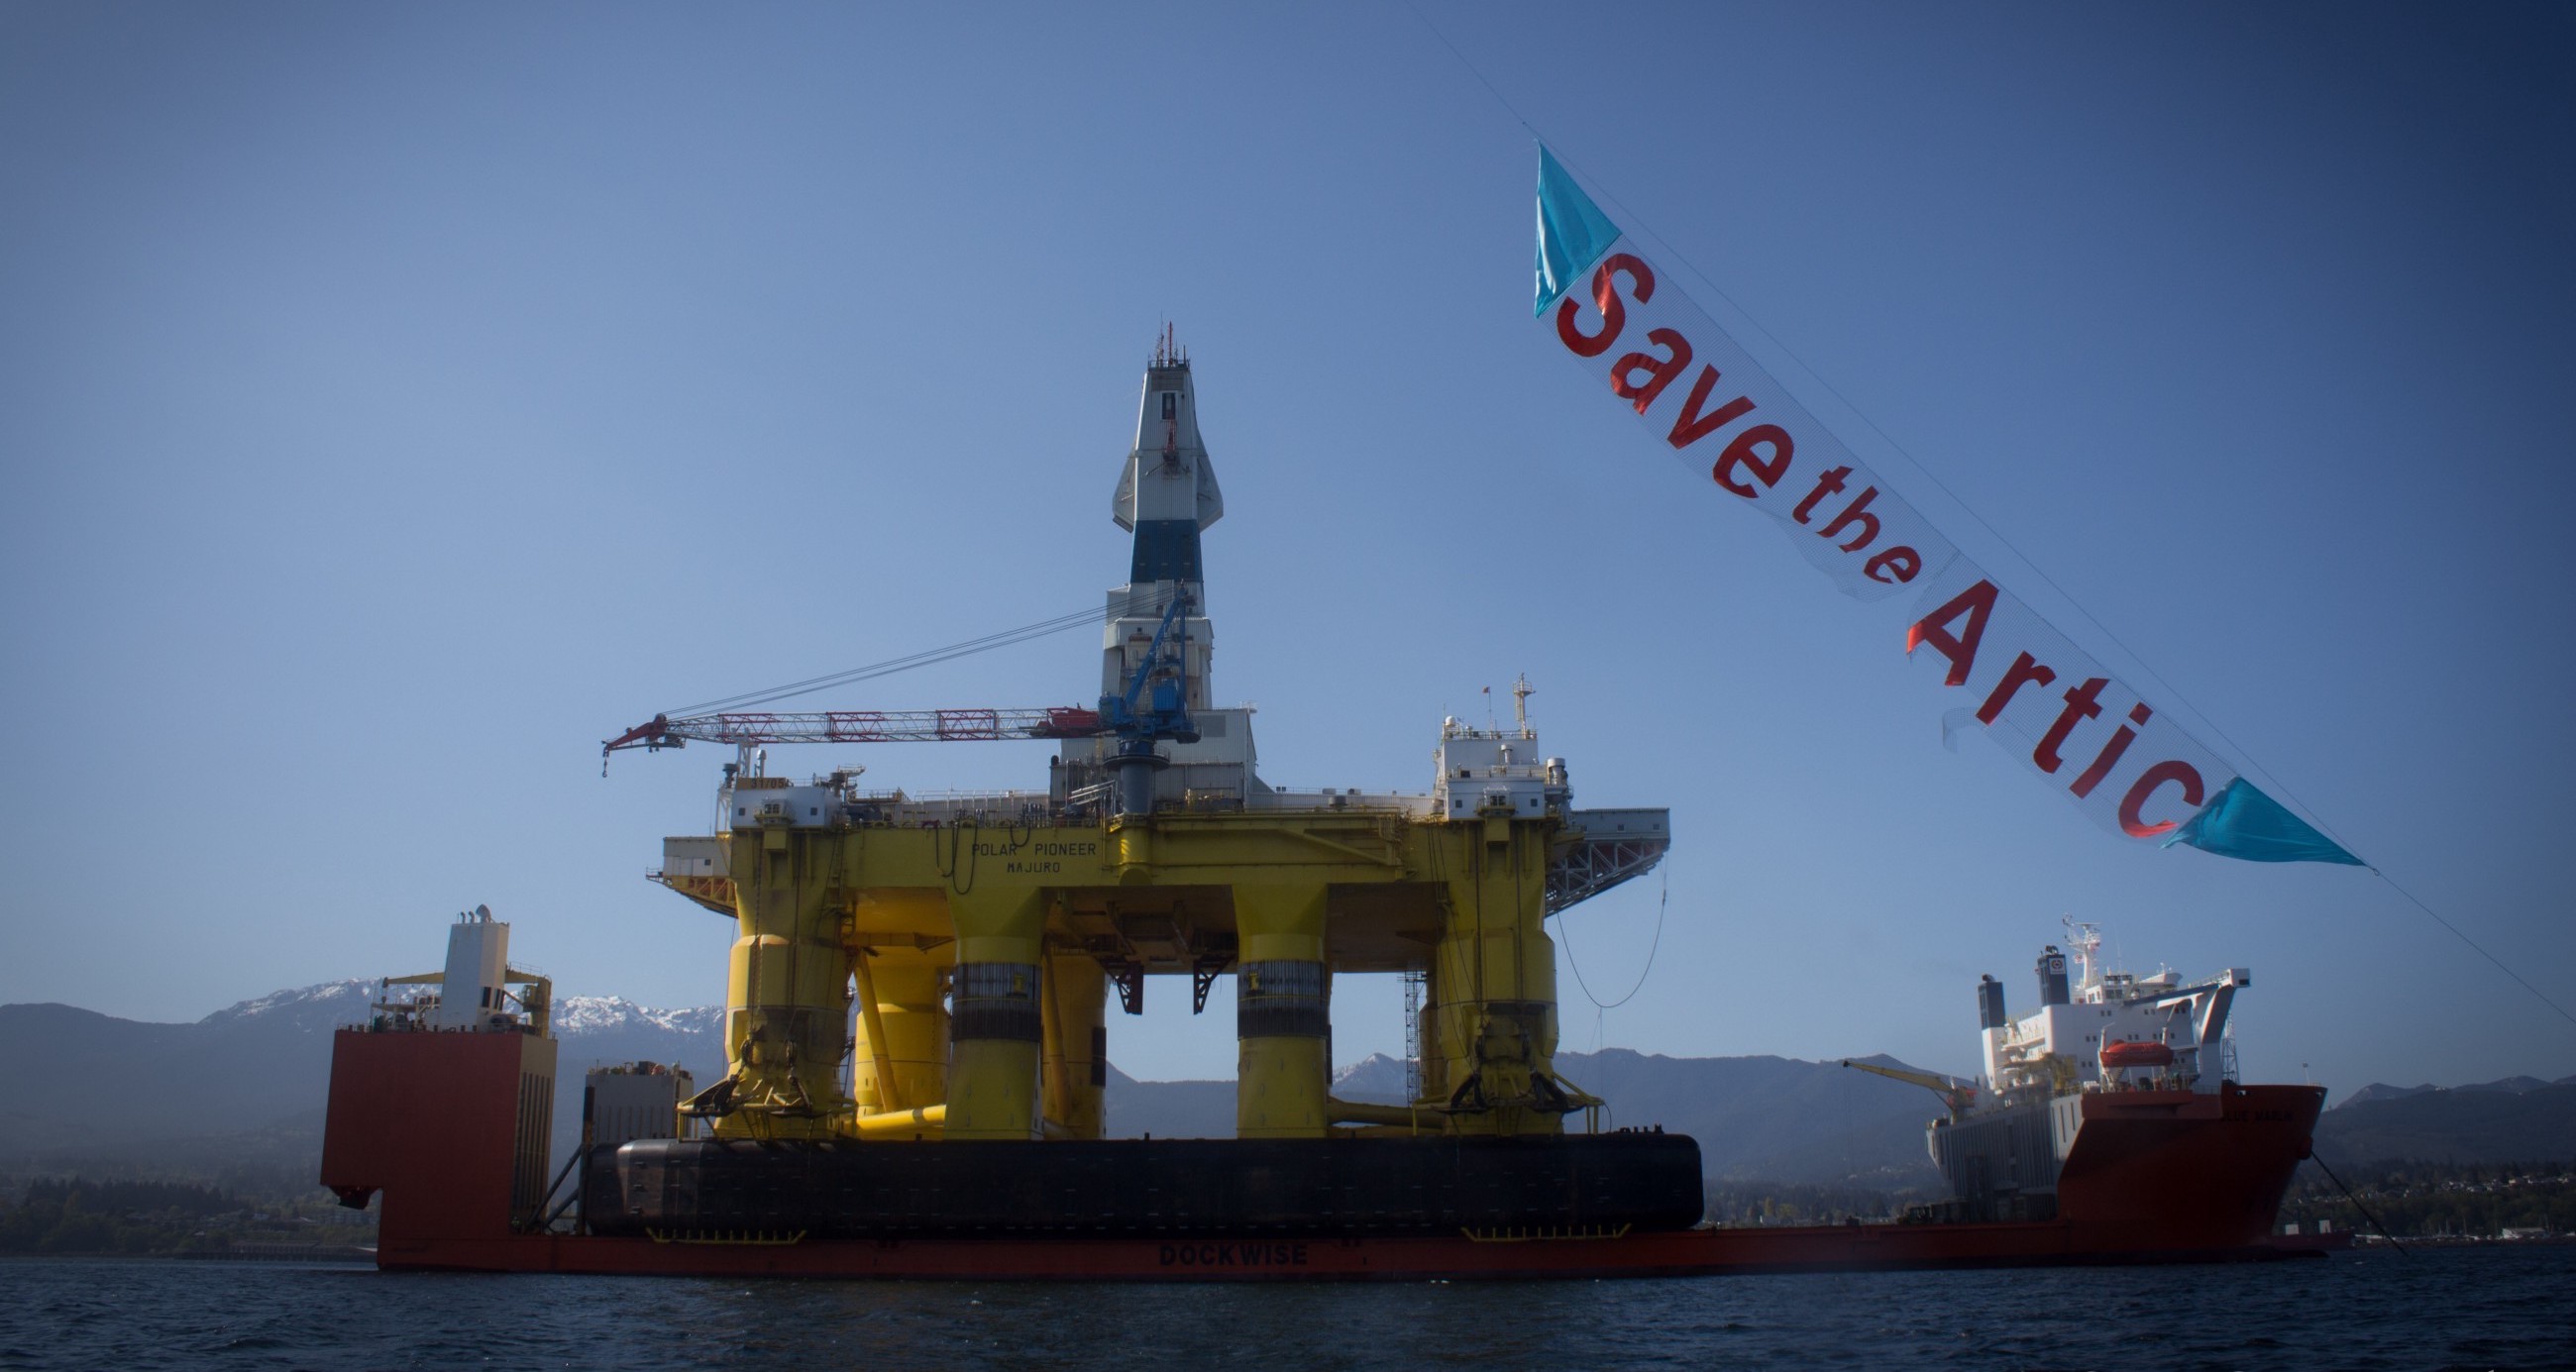 An oil platform sits on a ship, awaiting its voyage out to sea. Activists fly a 